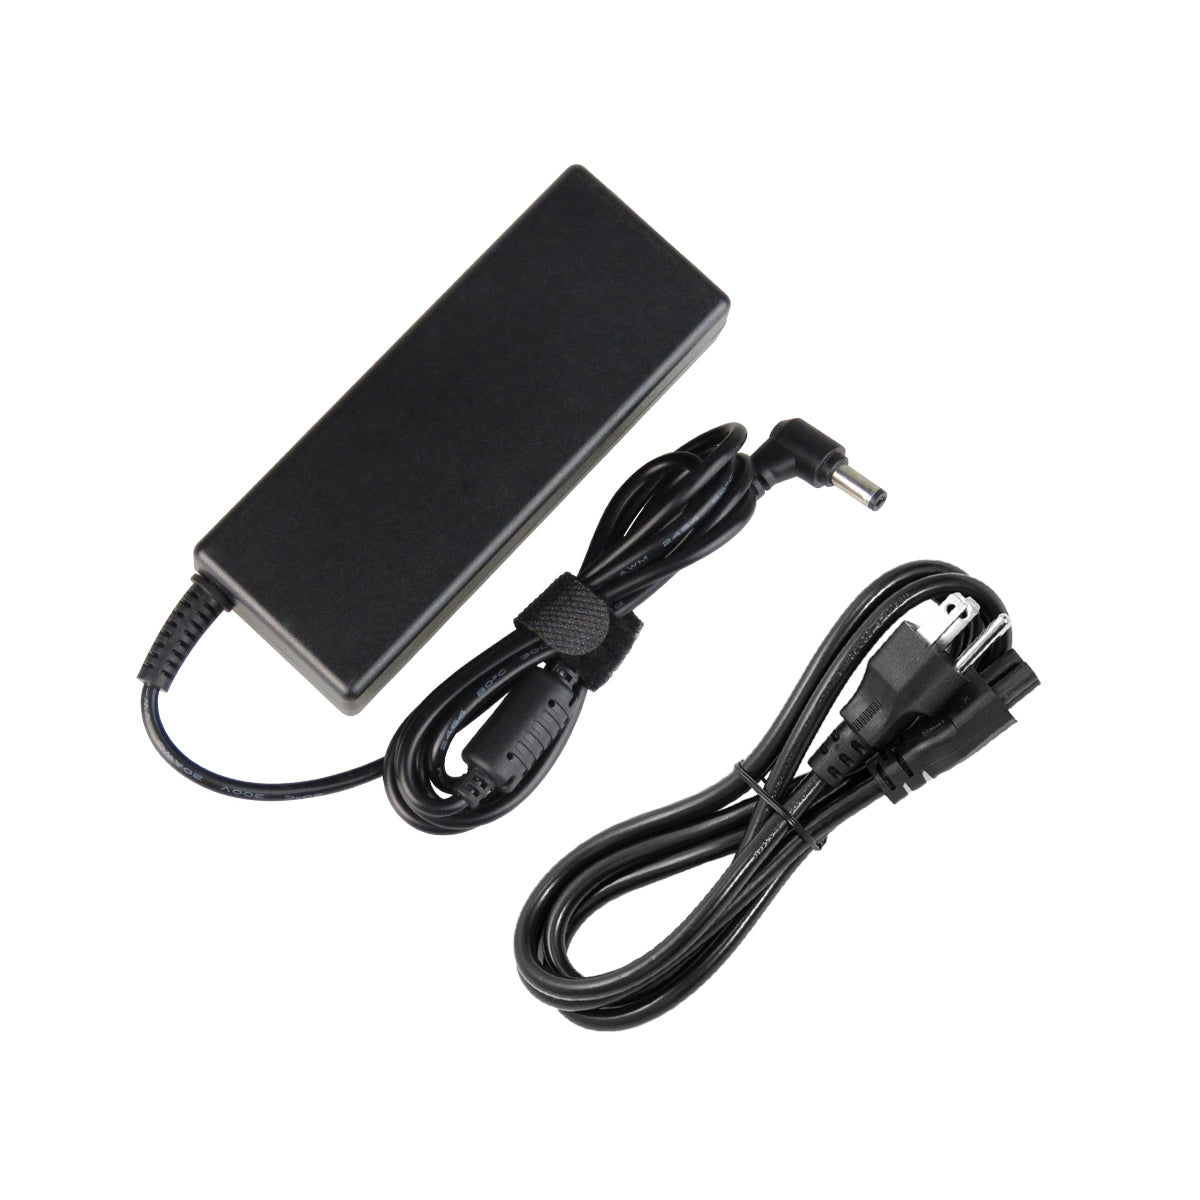 AC Adapter Charger for Toshiba Satellite c55t-a5287 Notebook.